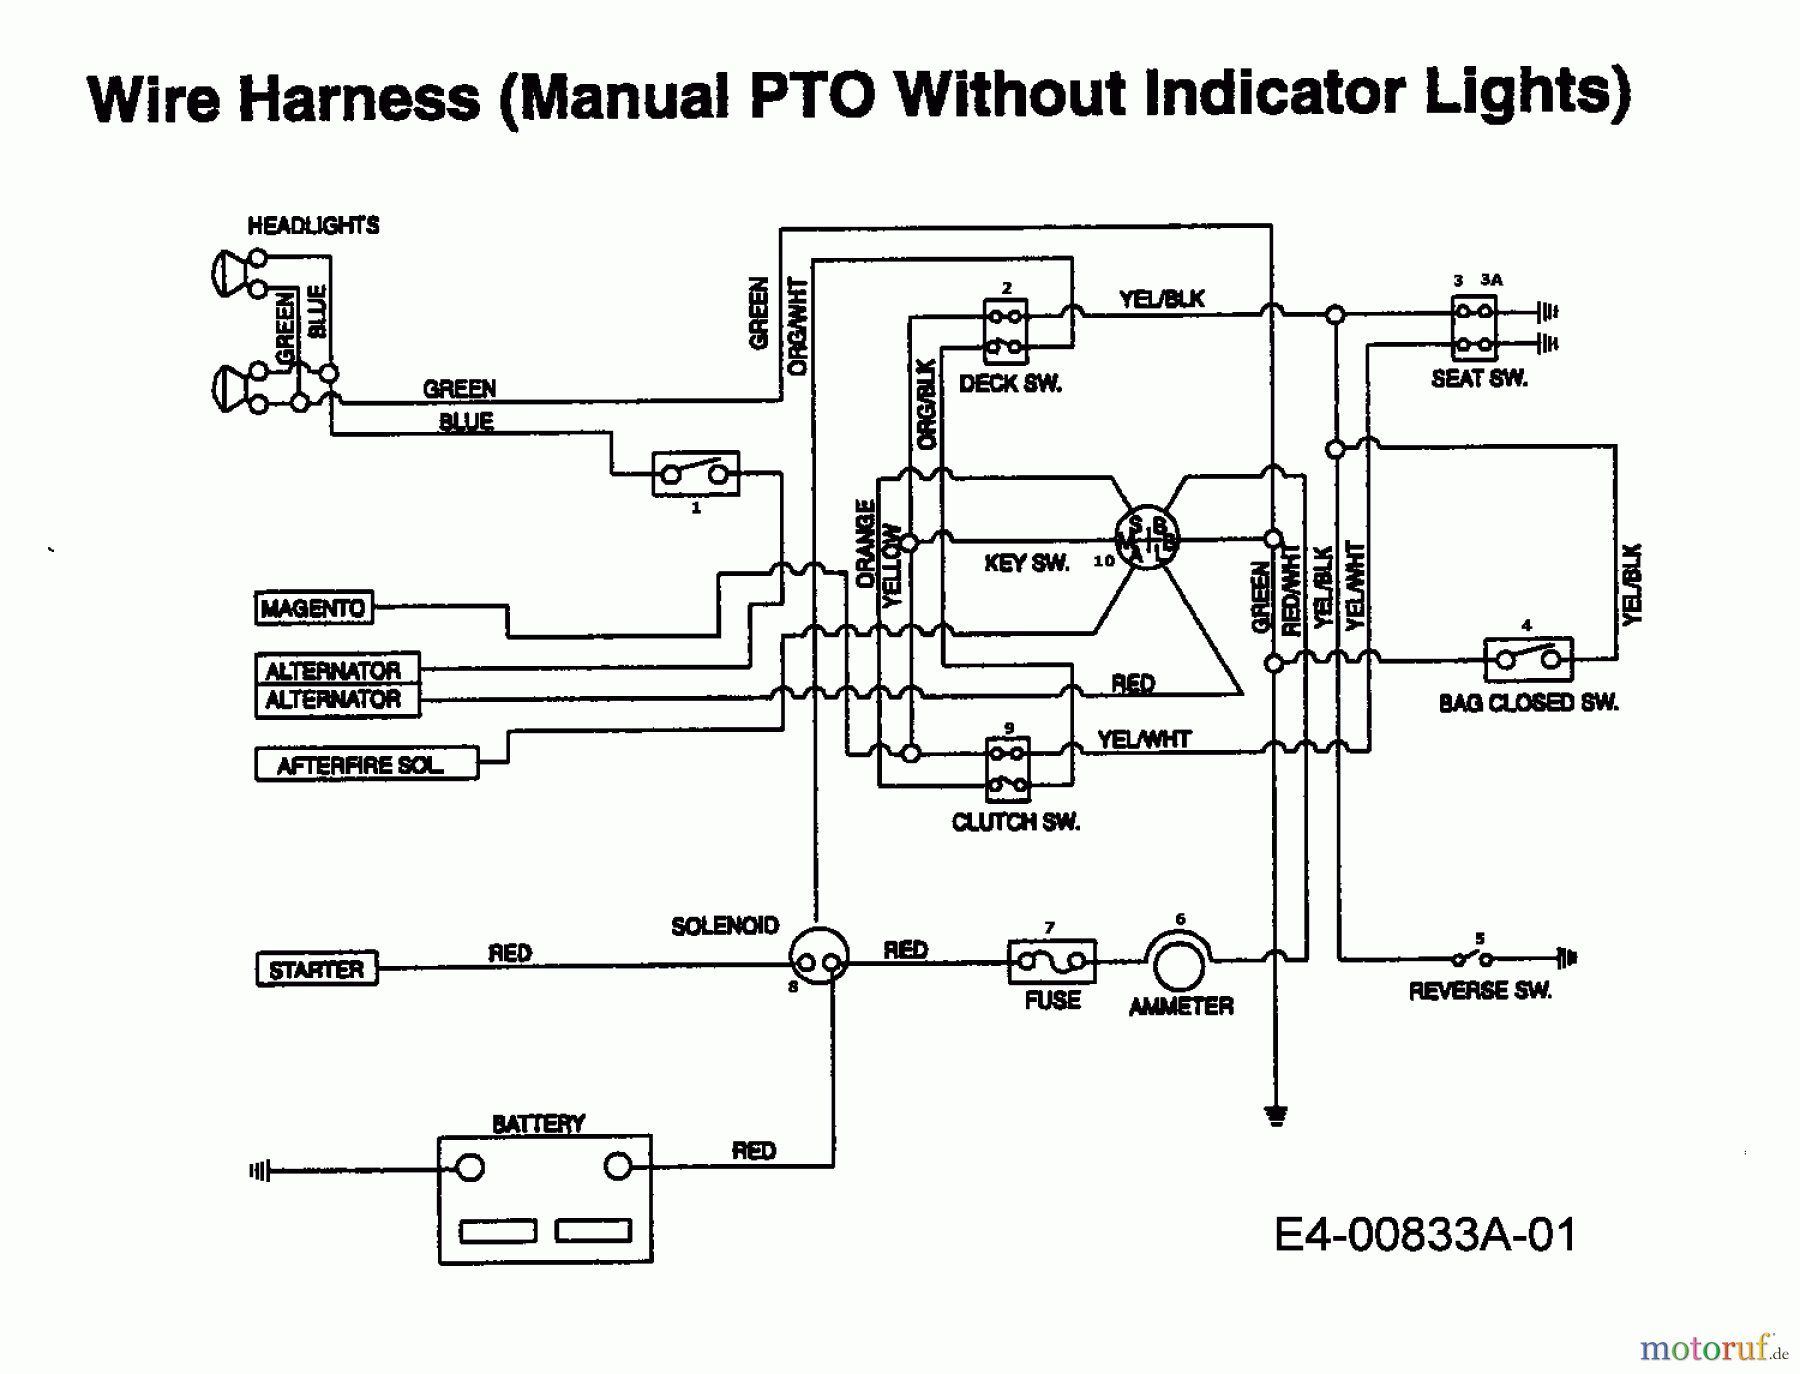  Edt Lawn tractors EDT 145 H-102 13CP793N610  (1999) Wiring diagram without indicator lights